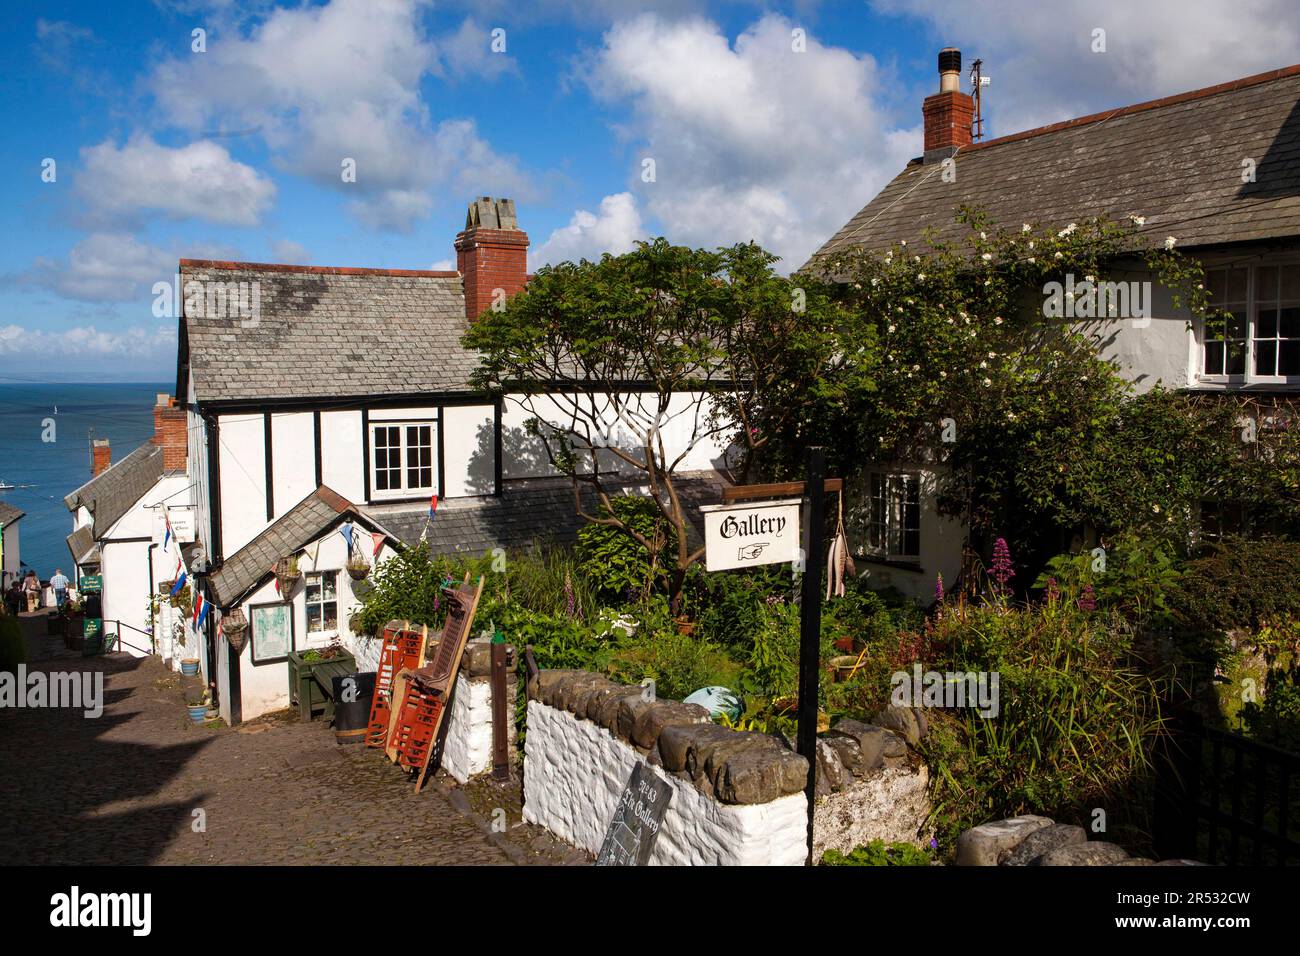 Main Road, Clovelly, Devon, Angleterre, Royaume-Uni Banque D'Images